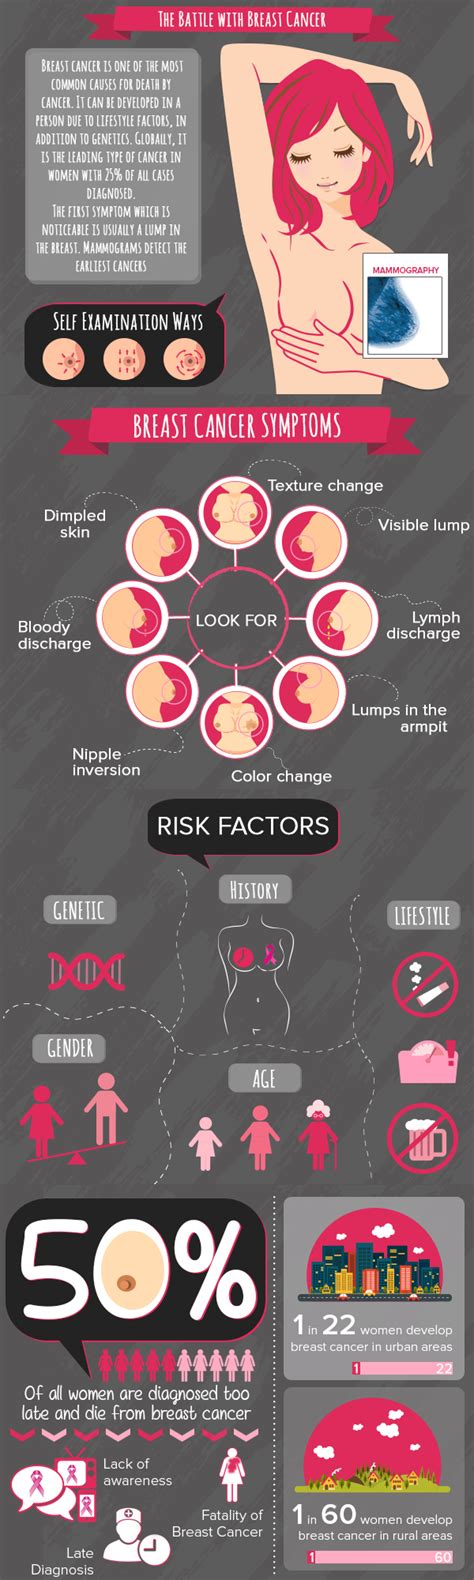 Symptoms Of Breast Cancer Images These Pics Showing The Common